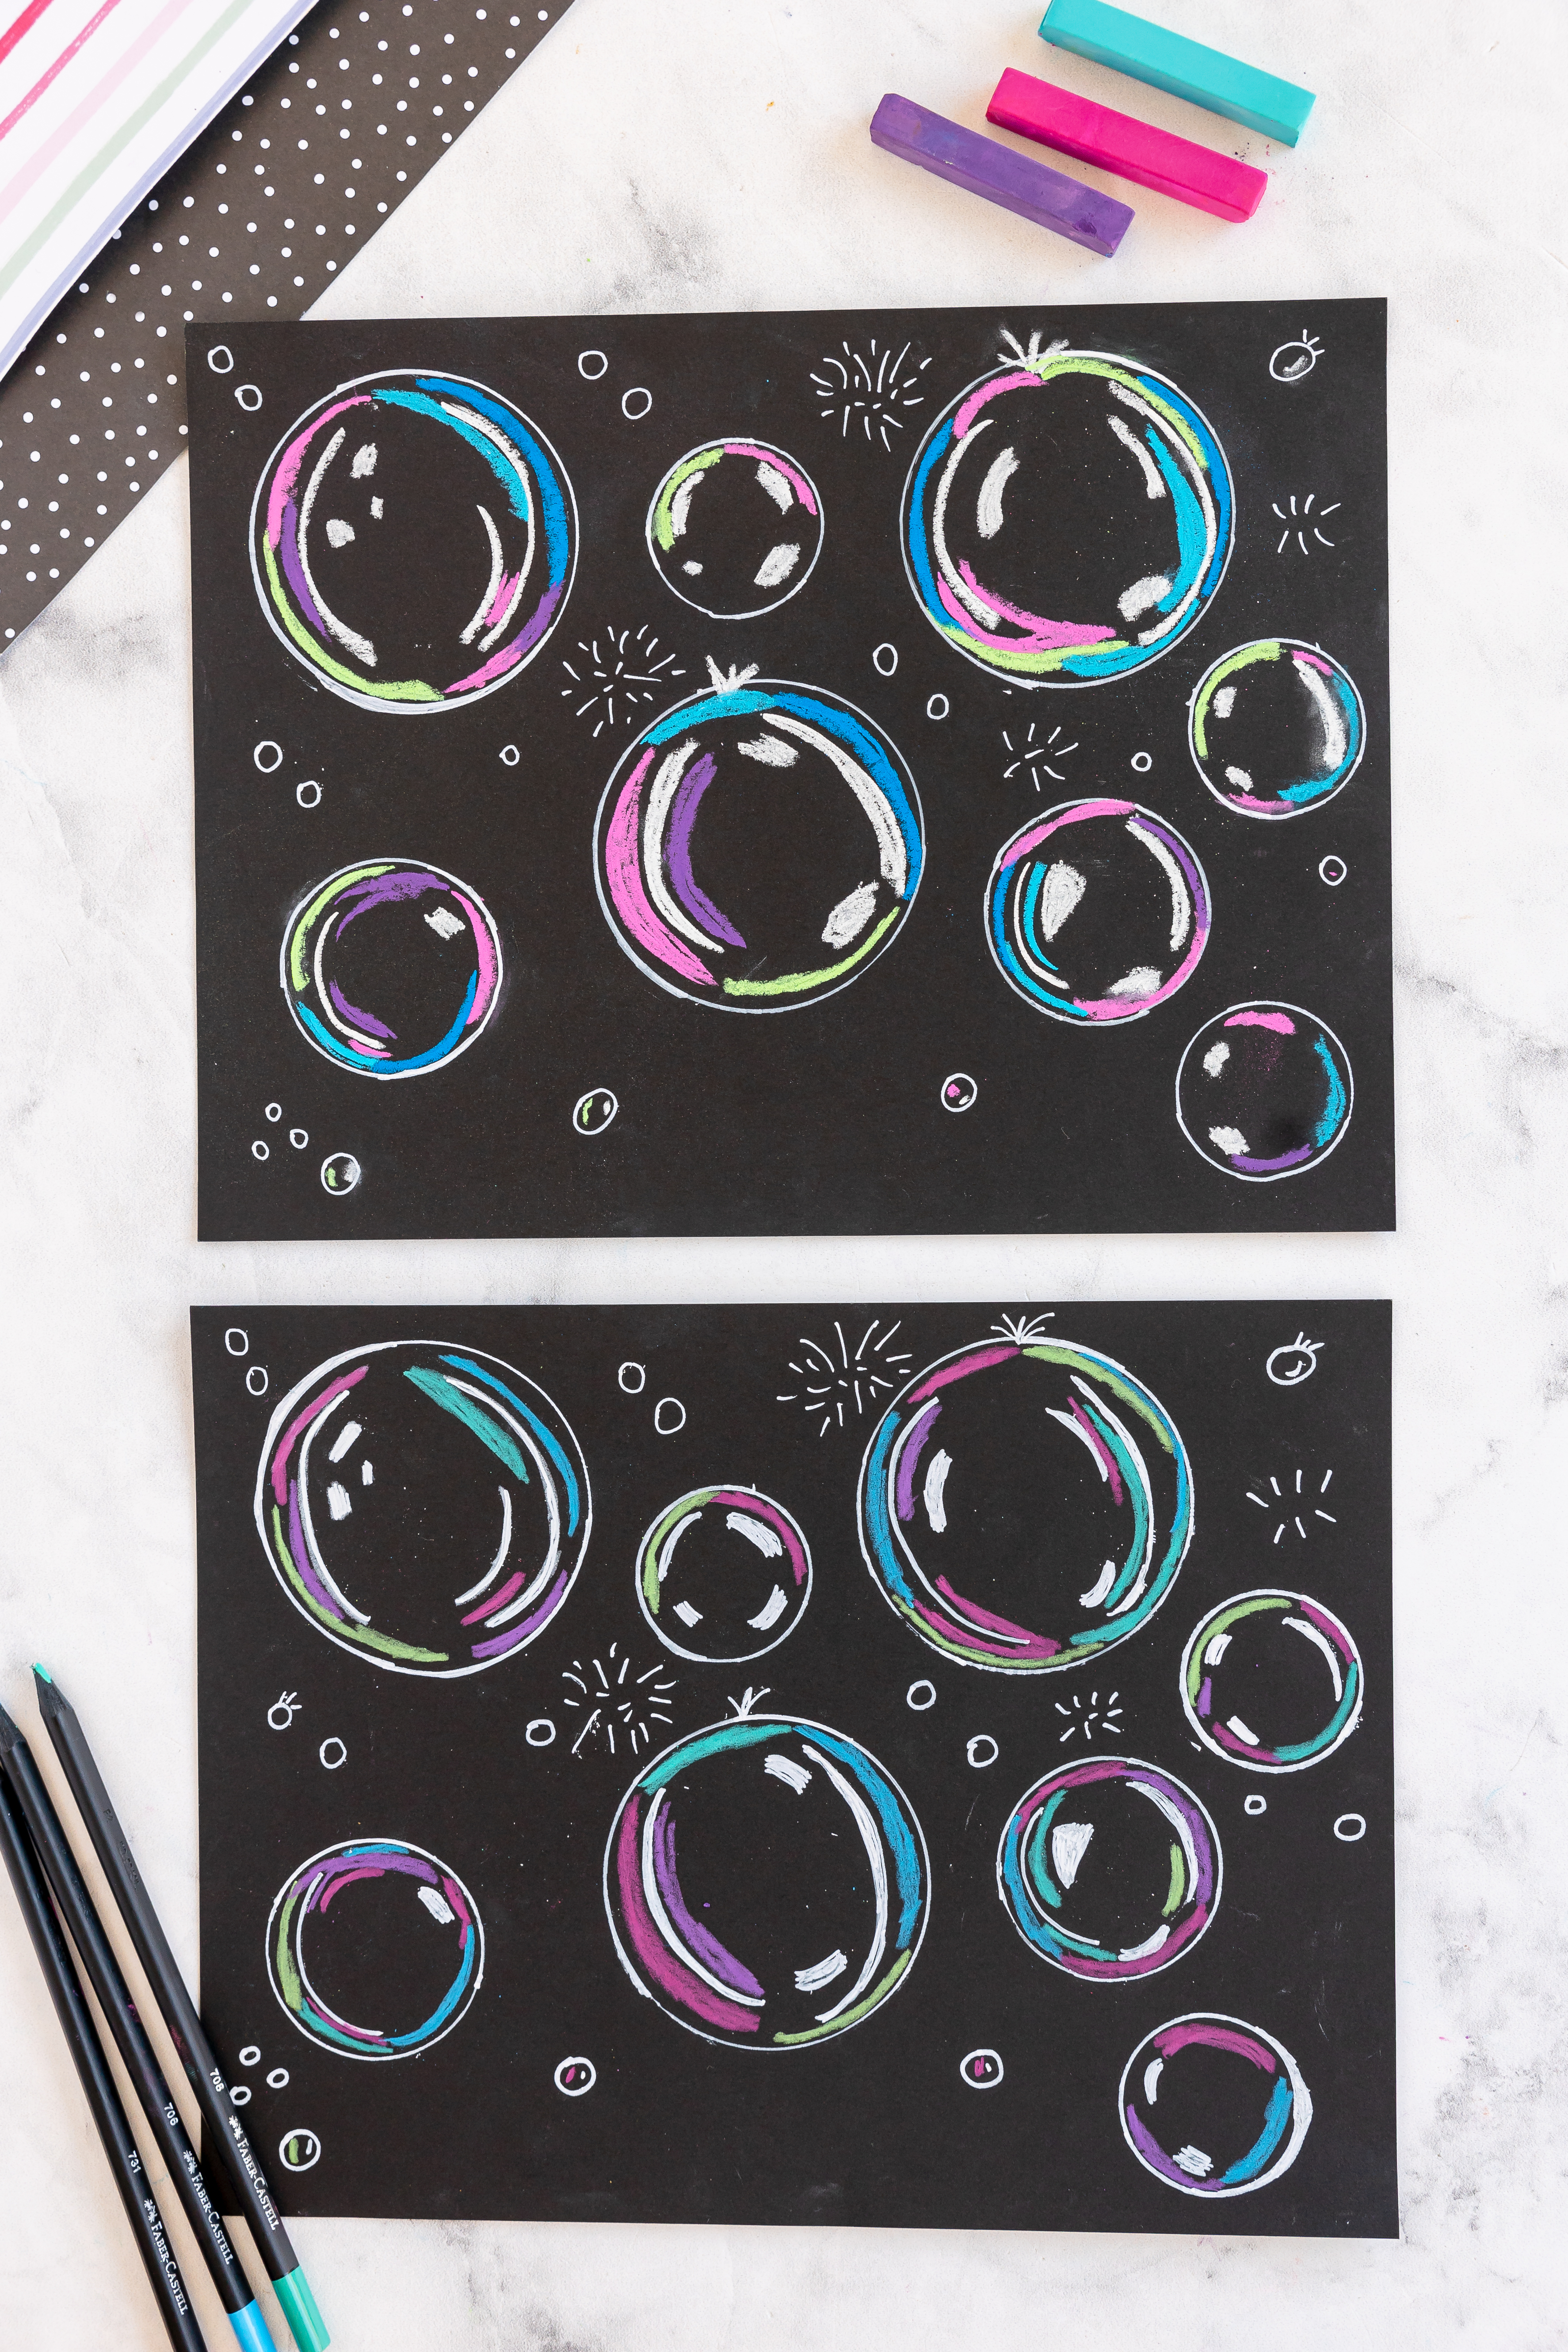 Bubble Art for Kids using oil pastels or colored pencils to add pops of color!